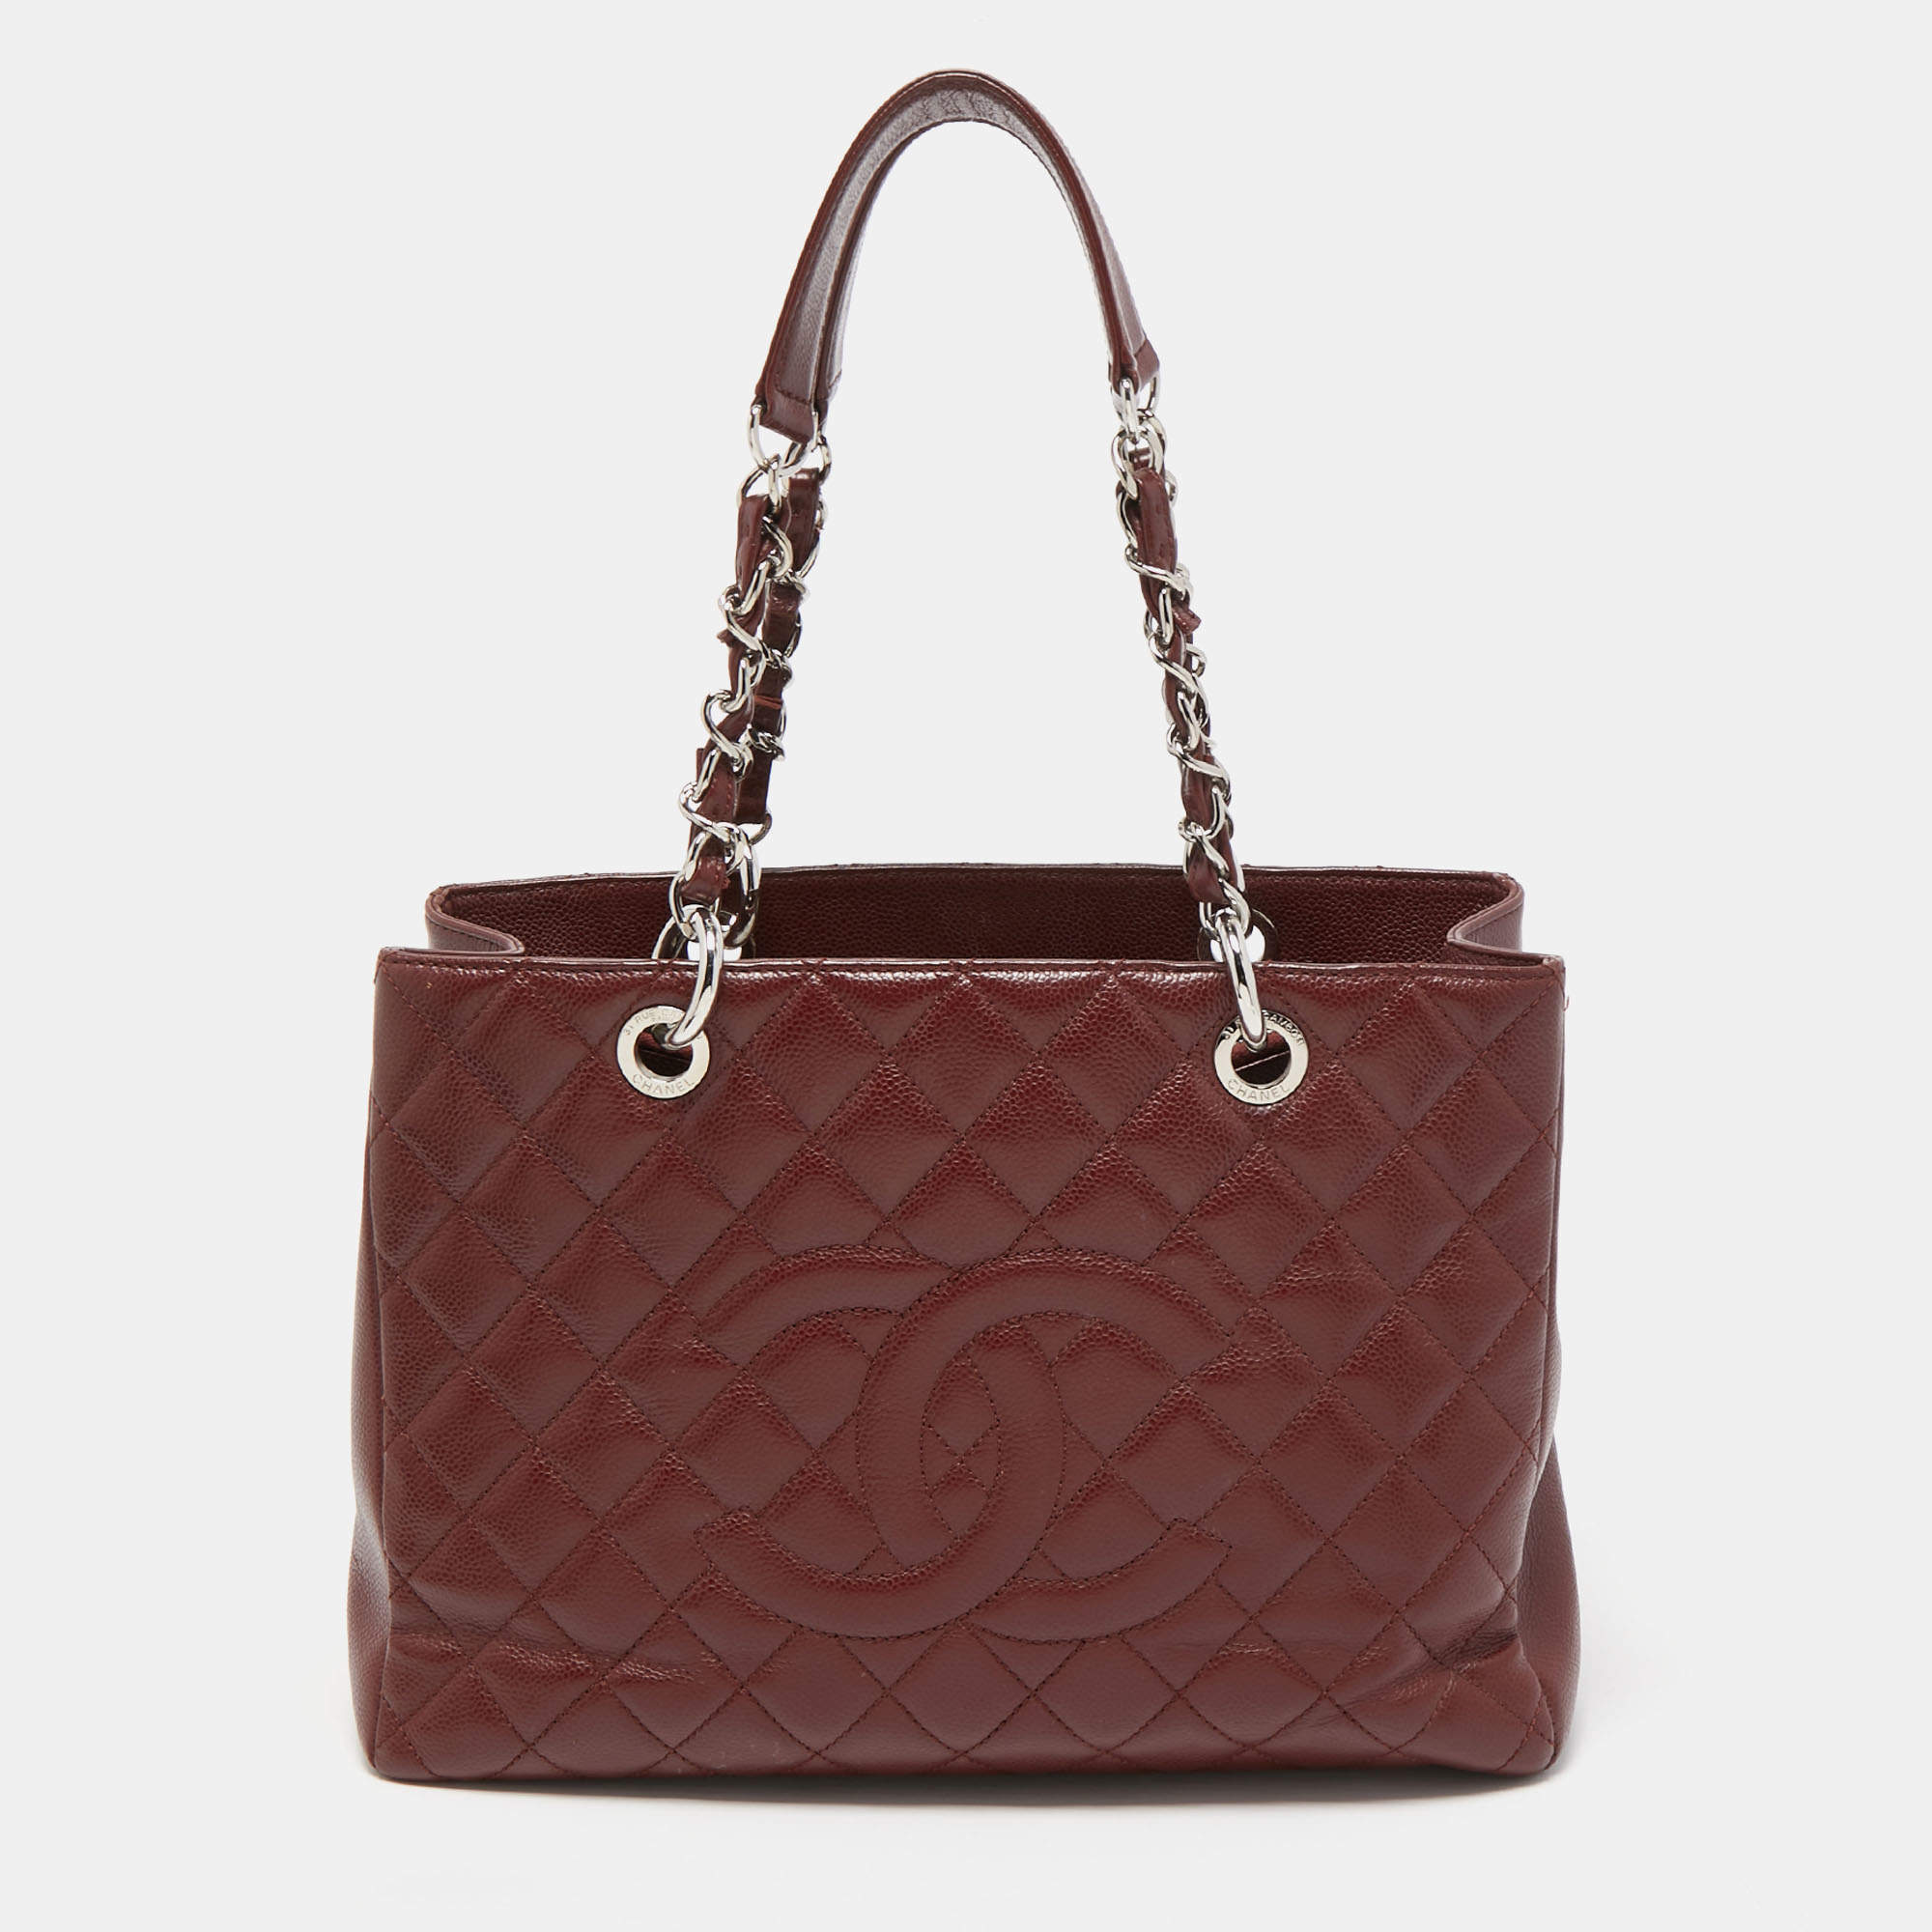 Chanel Dark Red Quilted Caviar Leather GST Tote